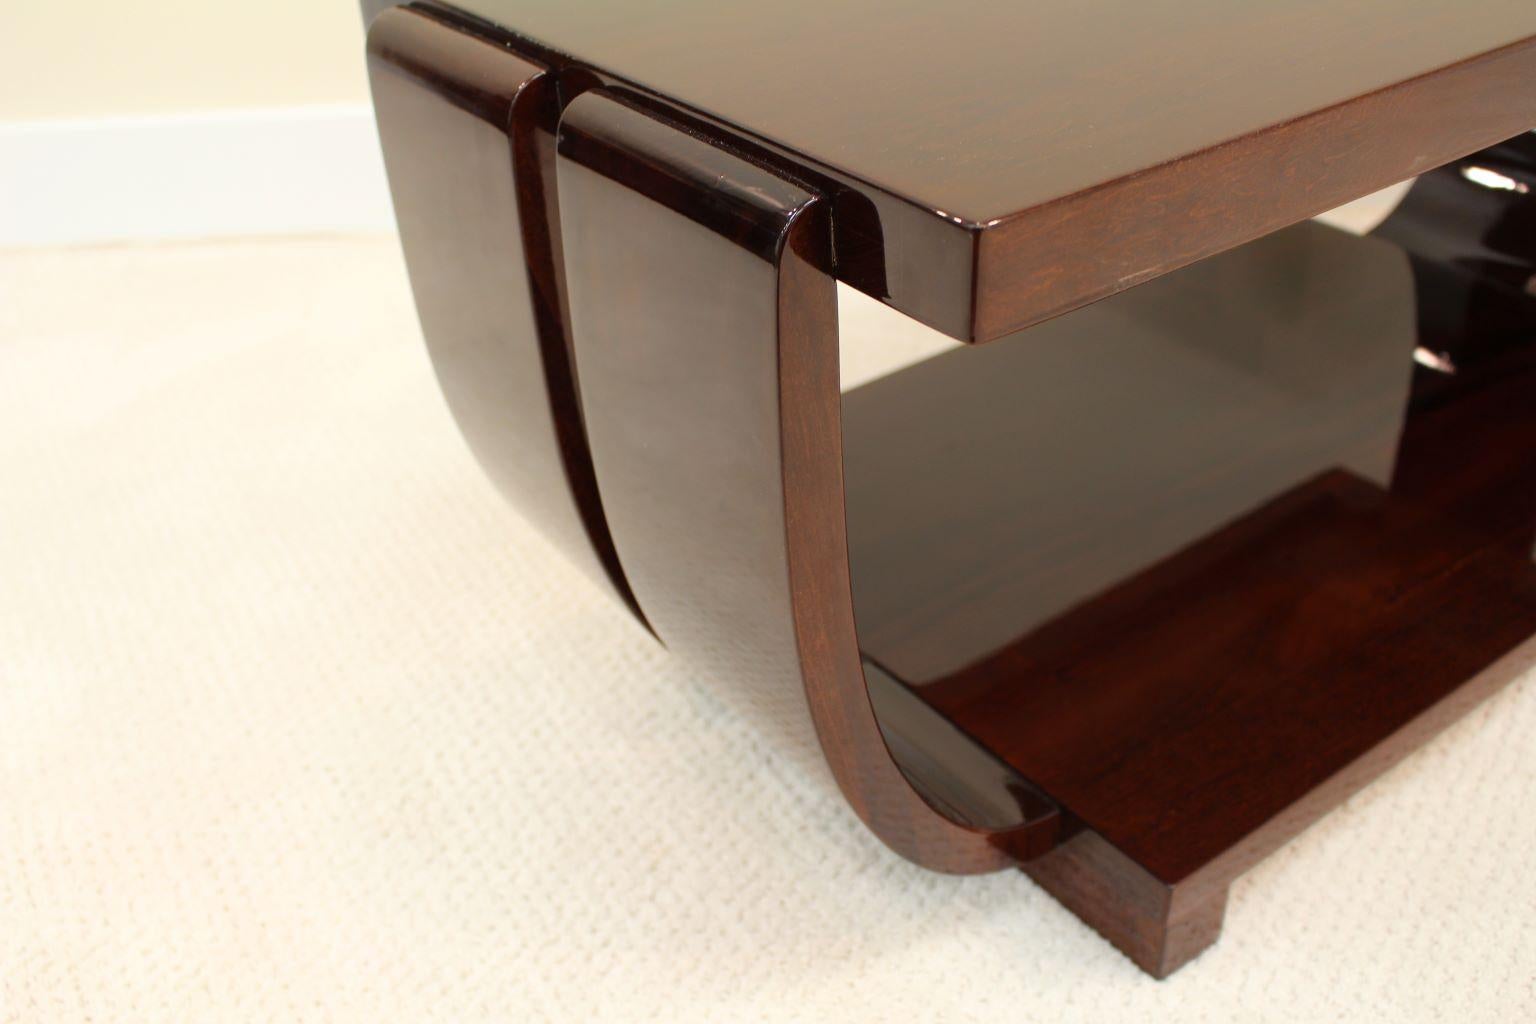 Professionally restored Machine Age cocktail table by the Modern Age Furniture Company. Stylized with double banded curved sides and finished in a rich walnut gloss finish. Measures: Height 16, length 34 1/2, width 17.

Reference: American Art